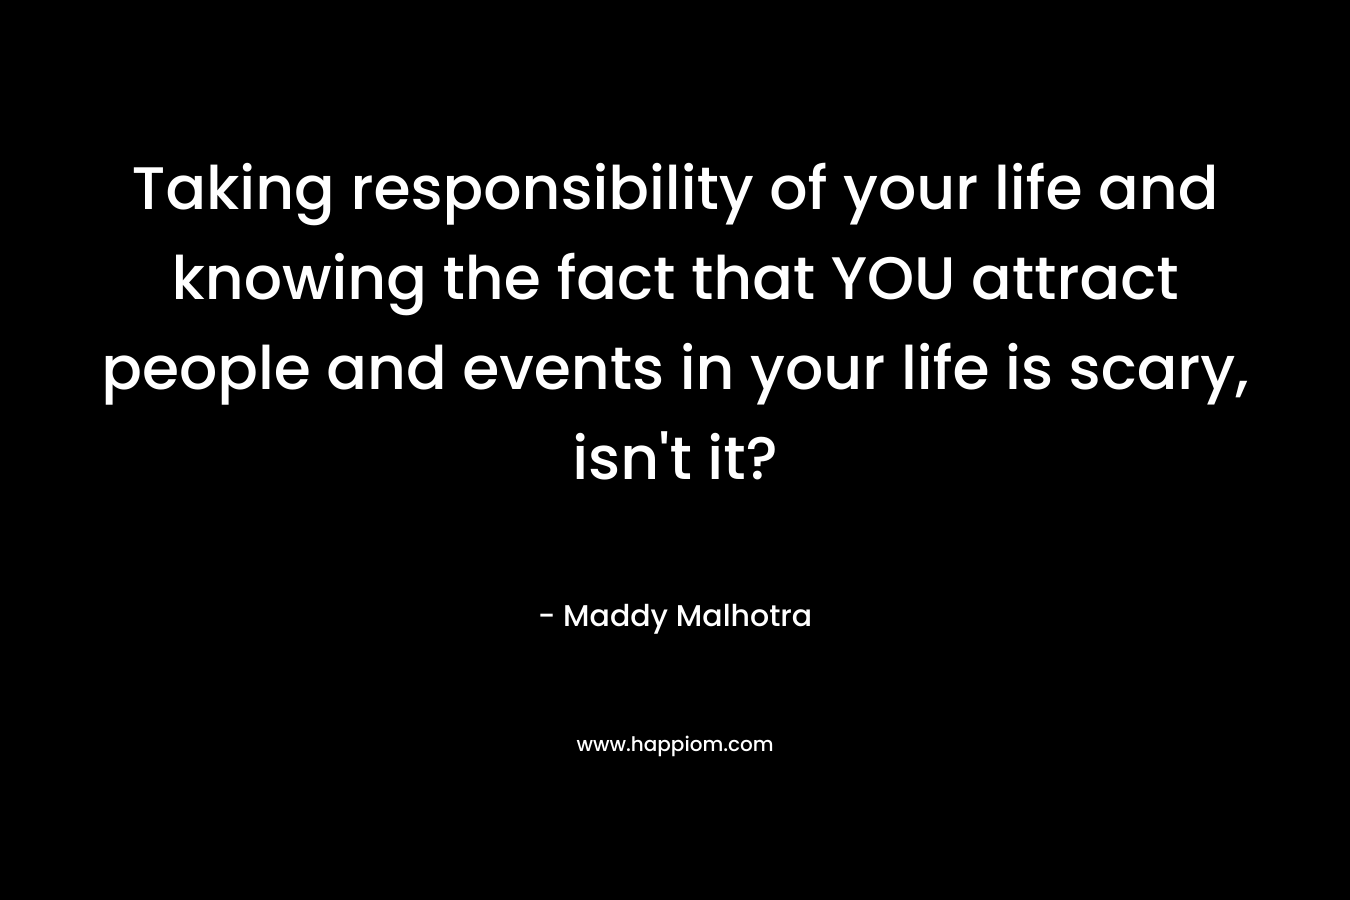 Taking responsibility of your life and knowing the fact that YOU attract people and events in your life is scary, isn’t it? – Maddy Malhotra